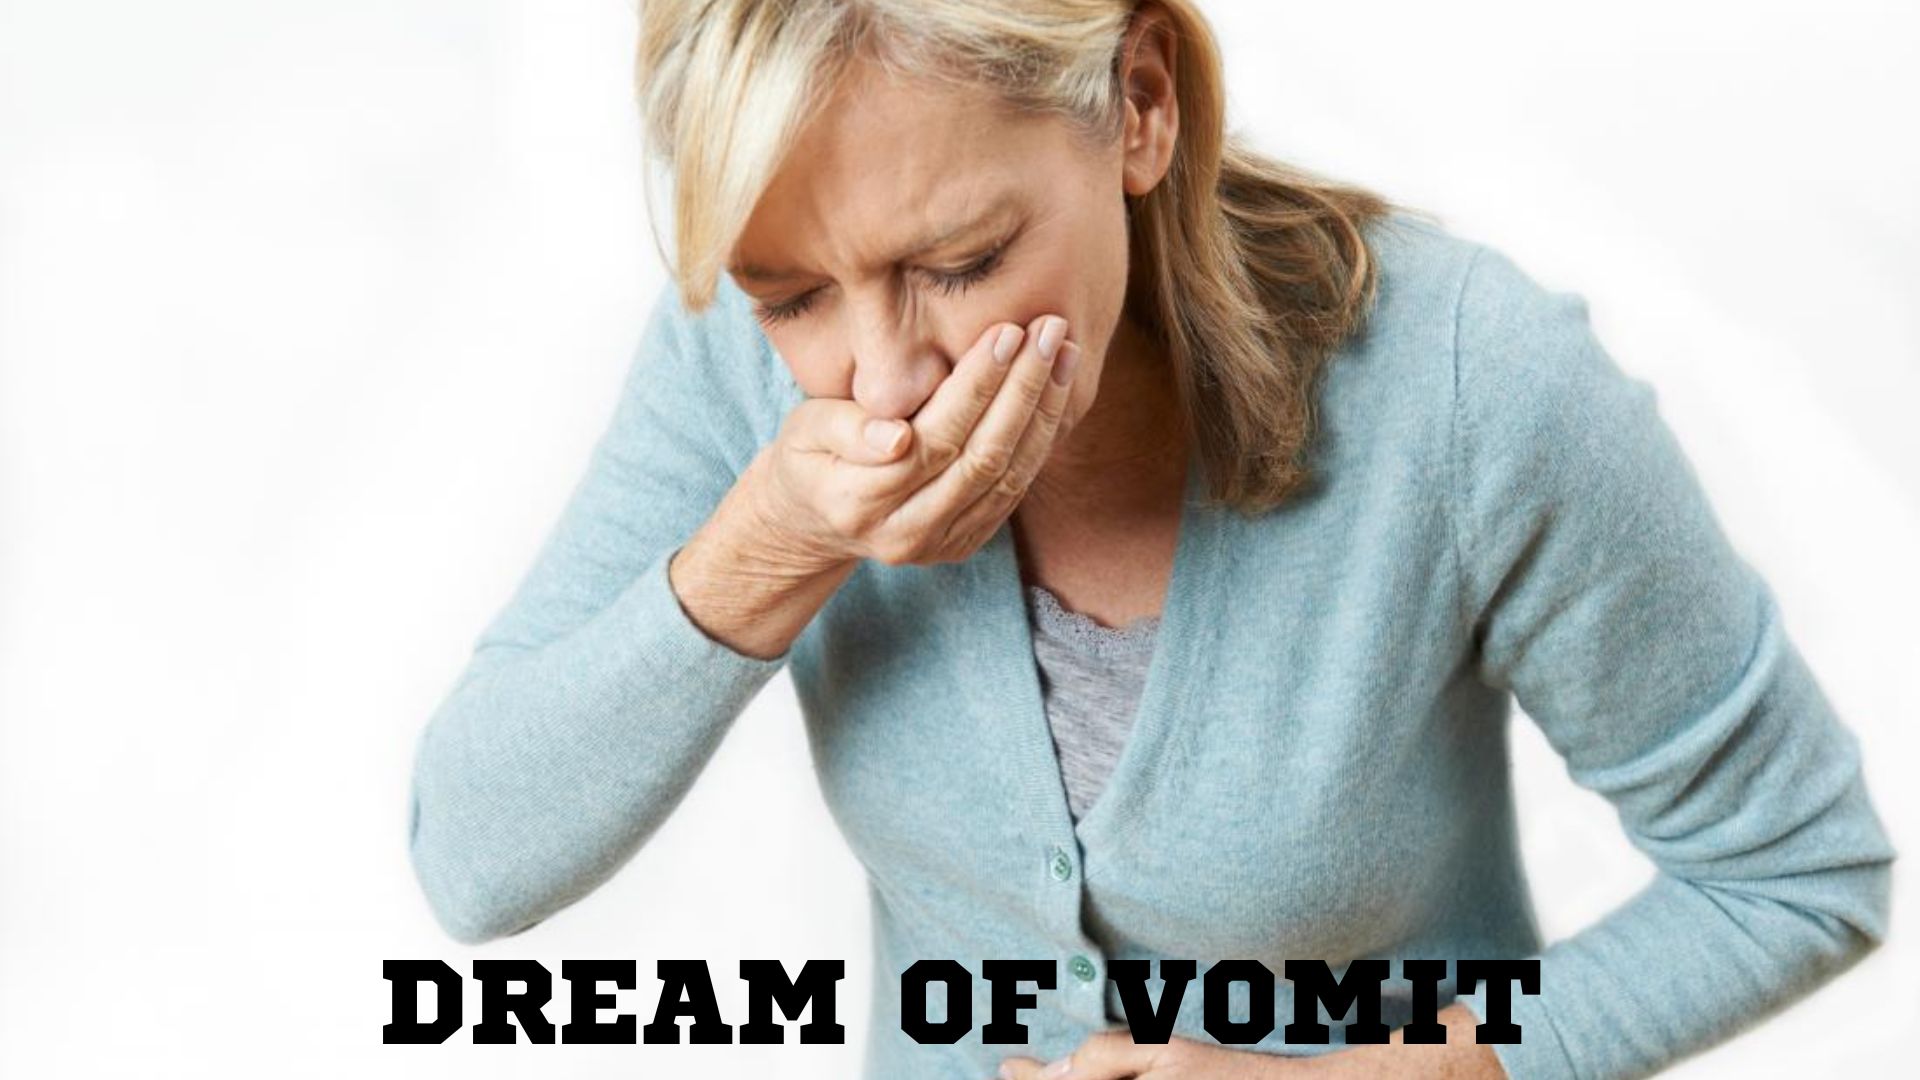 Dream Of Vomit Meaning - Dissatisfaction With Life